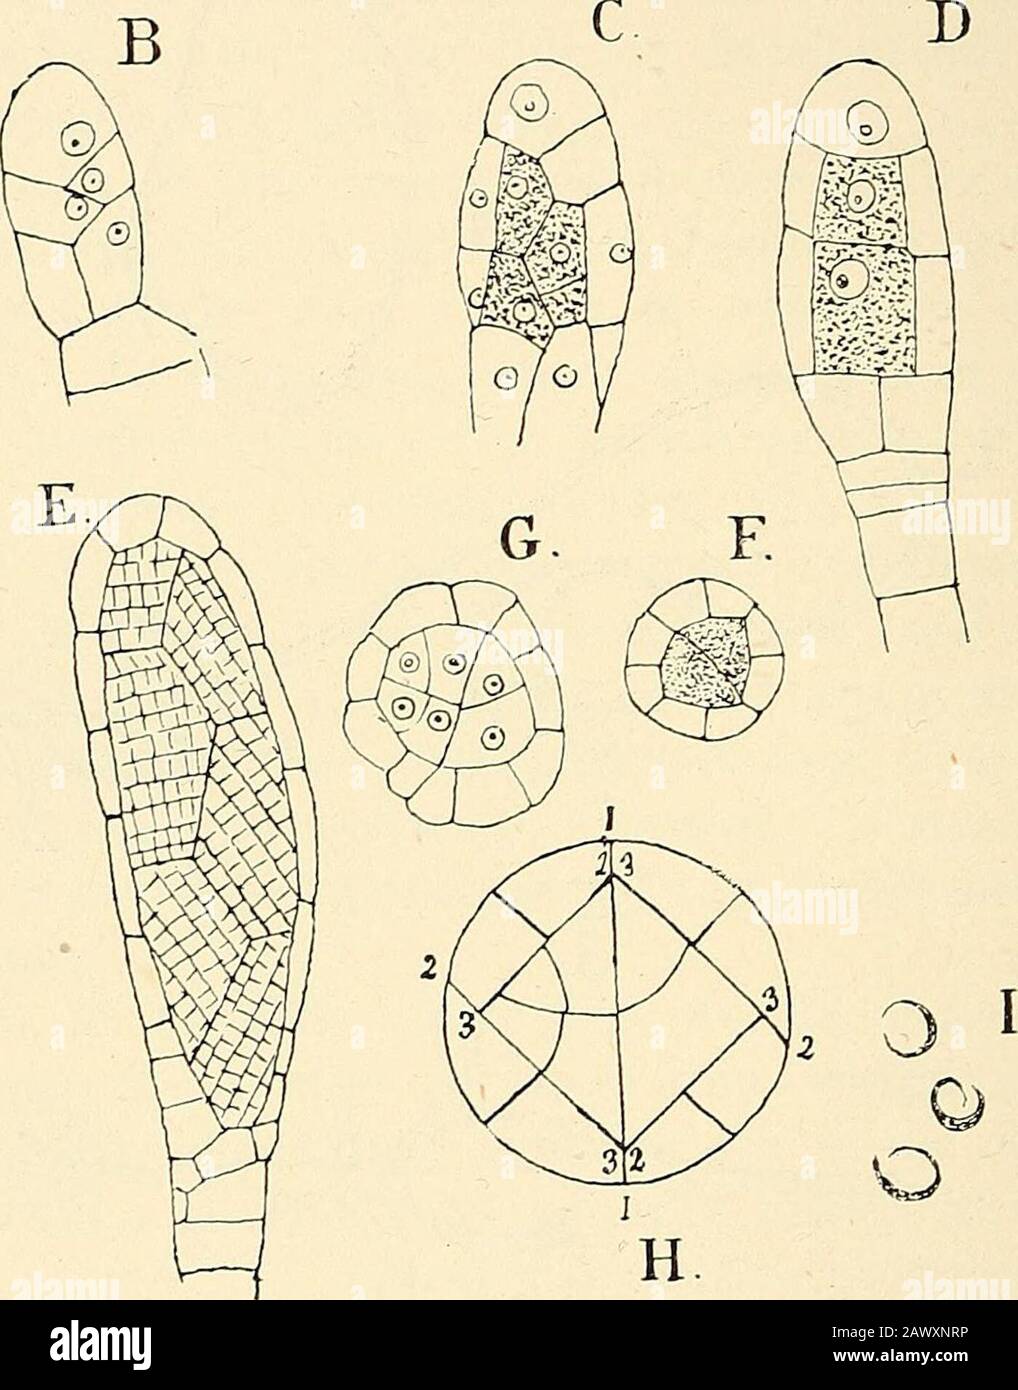 The structure & development of the mosses and ferns (Archegoniatae) . Fig. go.—Funaria hygrometrica (Sibth.). Development of the antheridium. A-D, Longitudinalsections of young stages, X 600; D is cut in a plane at right angles to C ; E, optical section ofan older stage, X300; G, F, cross-sections of young antheridia, x6oo; H, diagram showing thefirst divisions in the antheridium ; I, young spermatozoids, X 1200. wall. The outer cell either becomes at once the mother cell ofthe antheridium, or other transverse walls may occur, so that ashort pedicel is first formed (Fig. 90, A). Finally in the Stock Photo